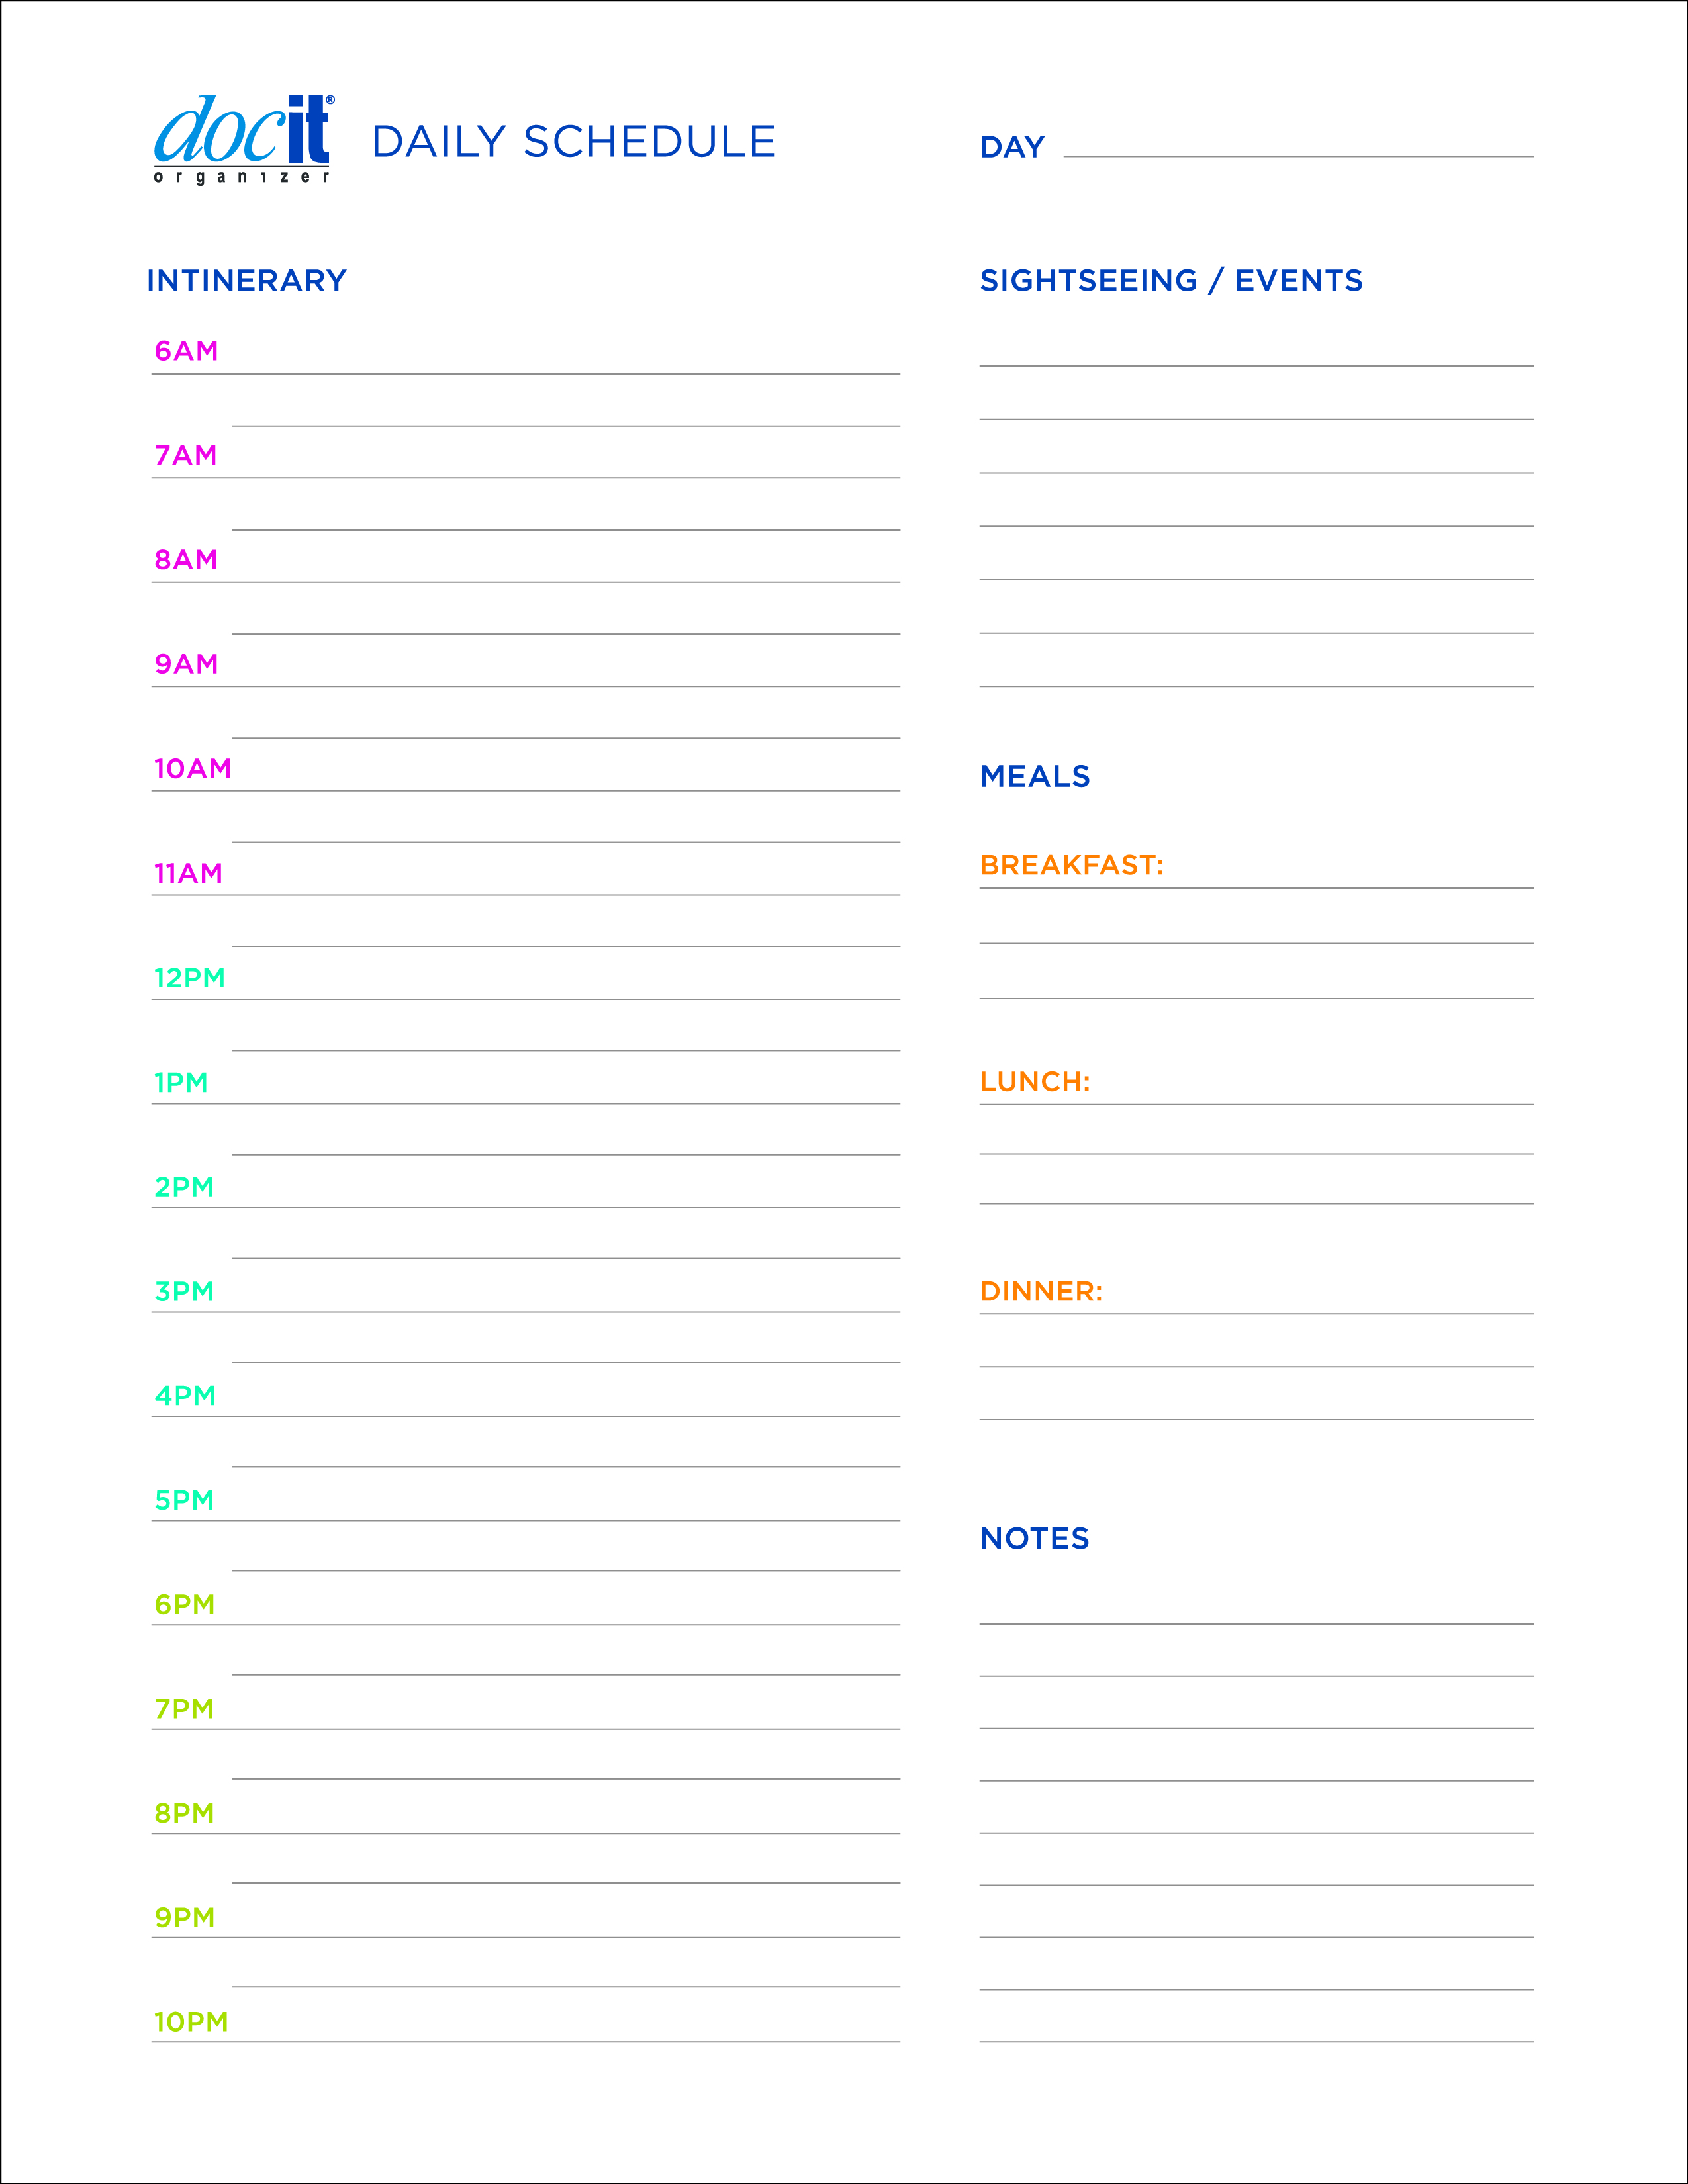 organized vacation planning - daily vacation schedule